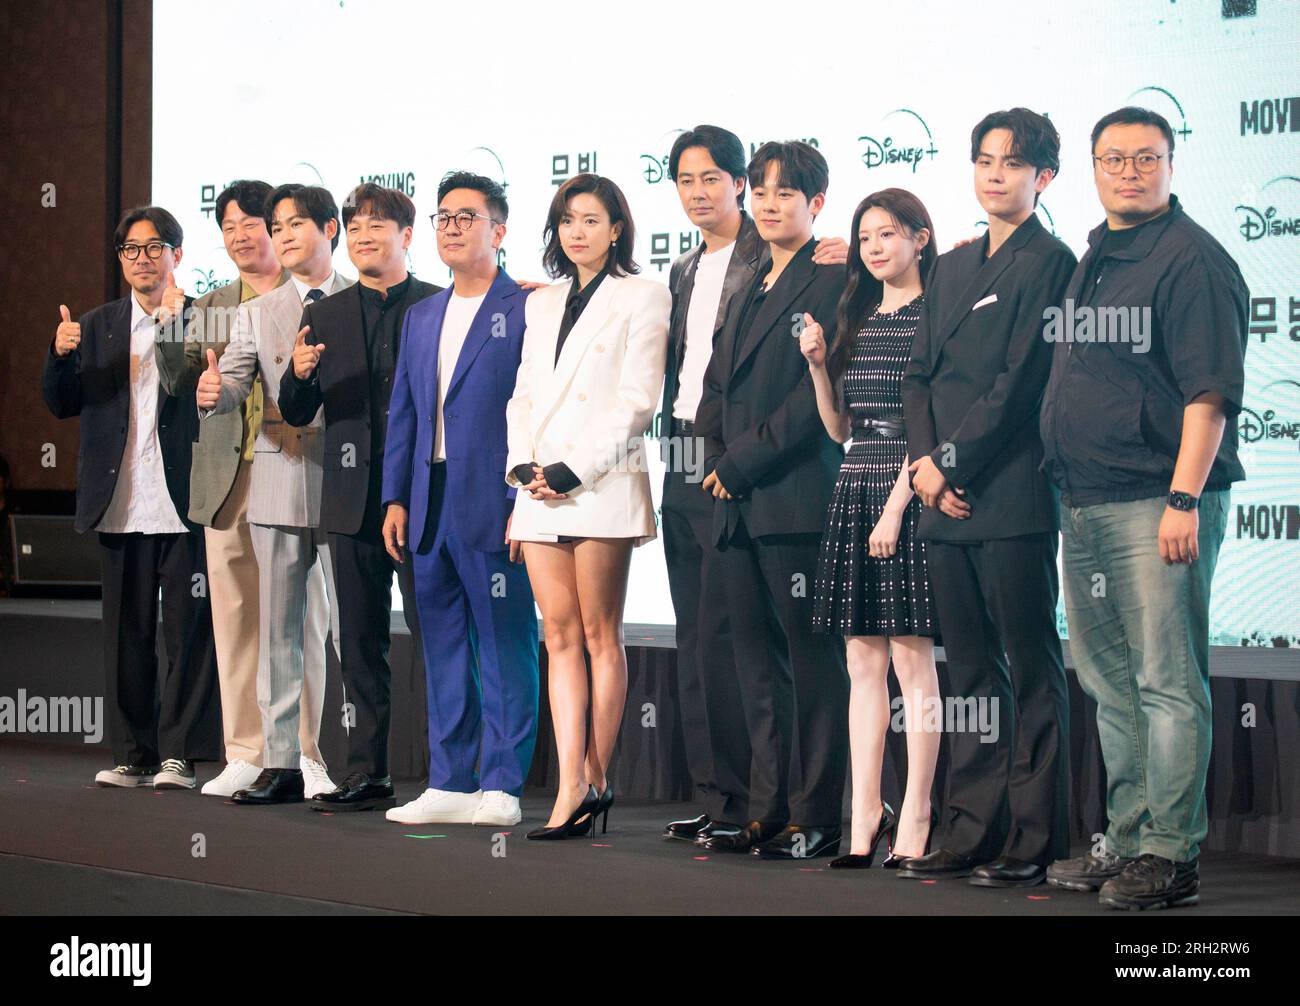 Park In-Je, Kim Hee-Won, Kim Sung-Kyun, Cha Tae-Hyun, Ryu Seung-Ryong, Han Hyo-Joo, Zo In-Sung, Lee Jung-Ha, Go Youn-Jung, Kim Do-Hoon and Kang Full, August 3, 2023 : (L-R) Director Park In-Je, cast members Kim Hee-Won, Kim Sung-Kyun, Cha Tae-Hyun, Ryu Seung-Ryong, Han Hyo-Joo, Zo In-Sung, Lee Jung-Ha, Go Youn-Jung, Kim Do-Hoon and writer Kang Full attend a press conference for Disney  series 'Moving' in Seoul, South Korea. The sci-fi action series 'Moving' features a group of superpowered individuals who hide their true abilities from the world in order to protect their families from danger. Stock Photo